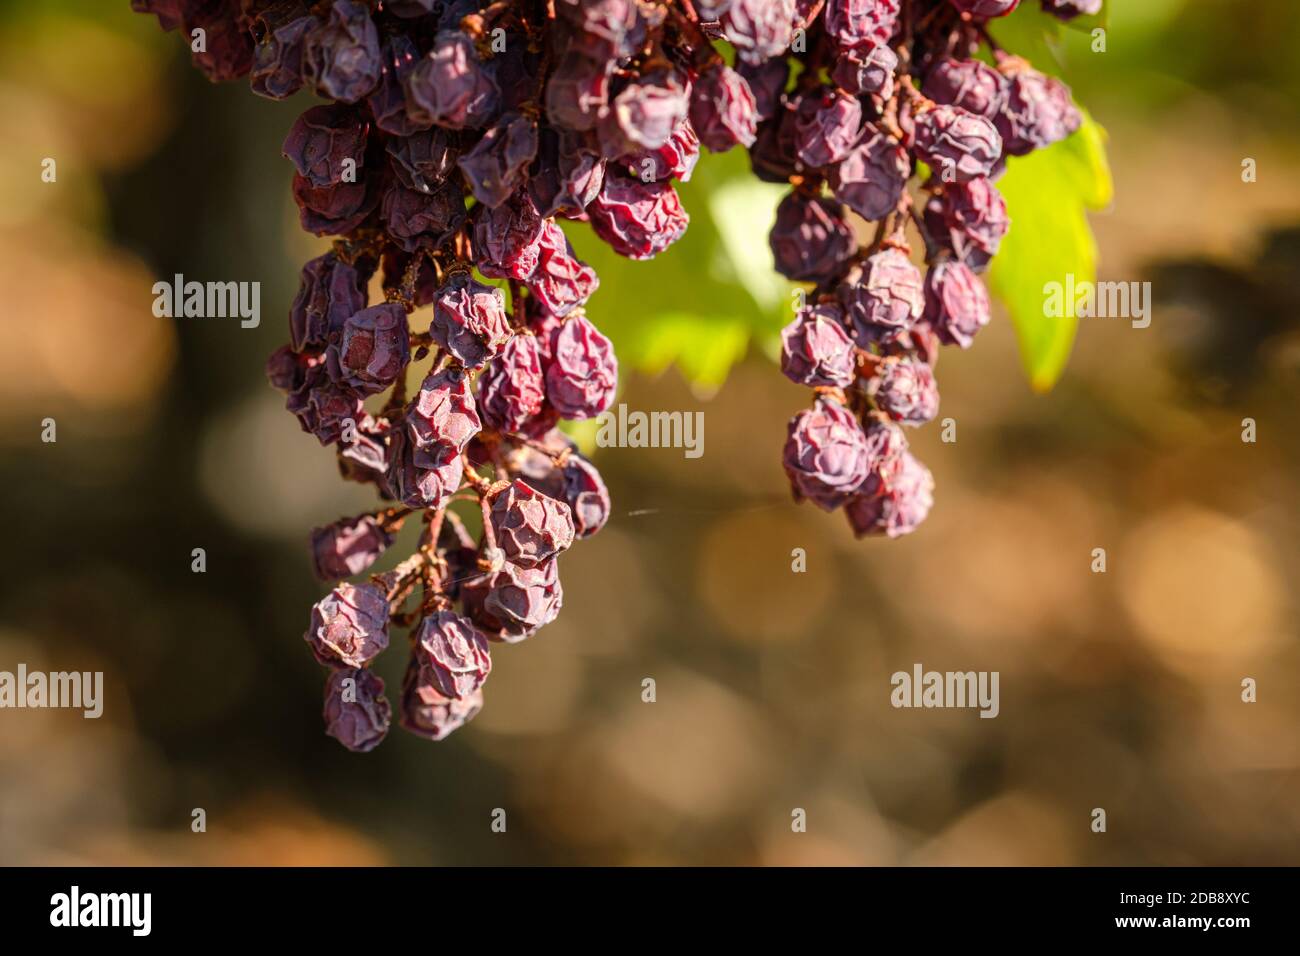 Dried Burgundy grapes close-up Stock Photo